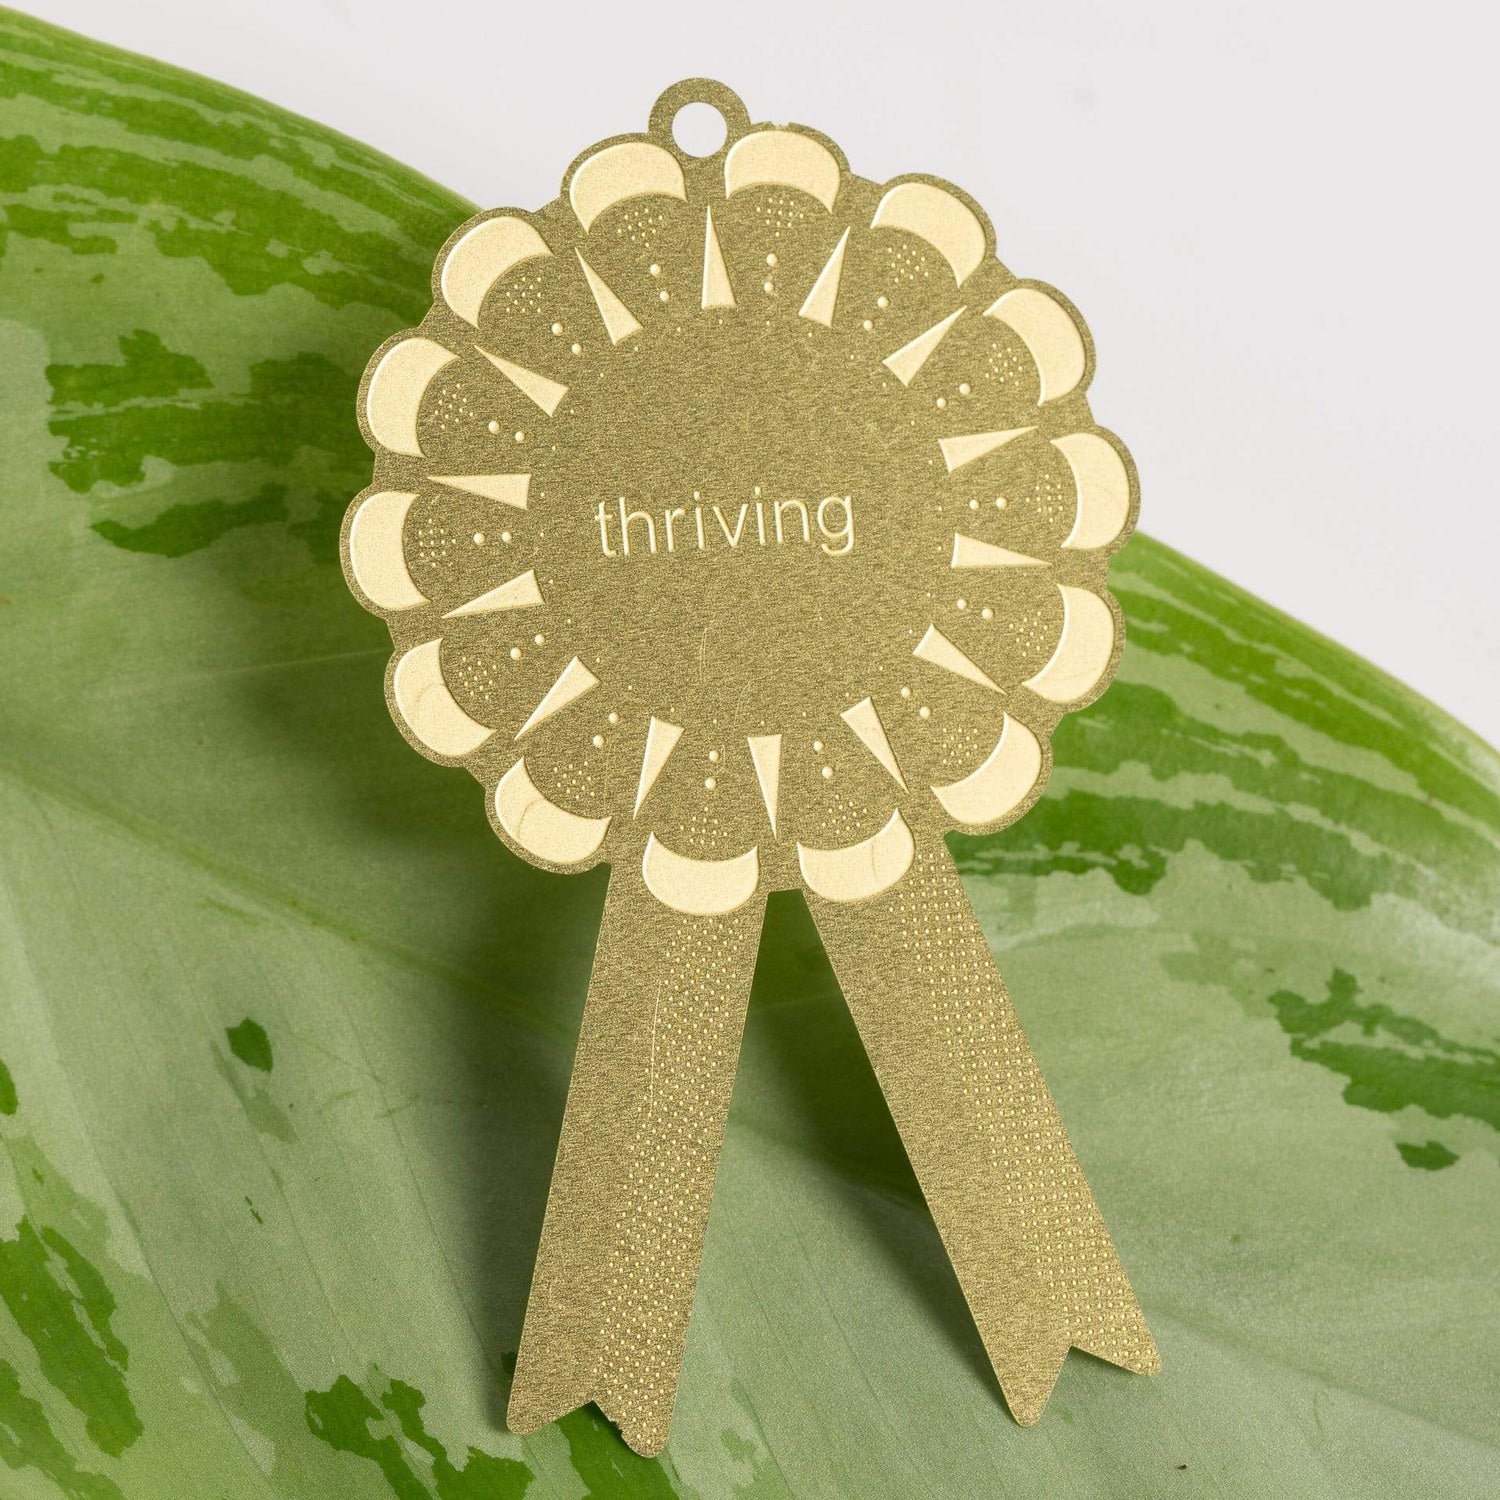 Urban Sprouts accessories Thriving Plant Awards